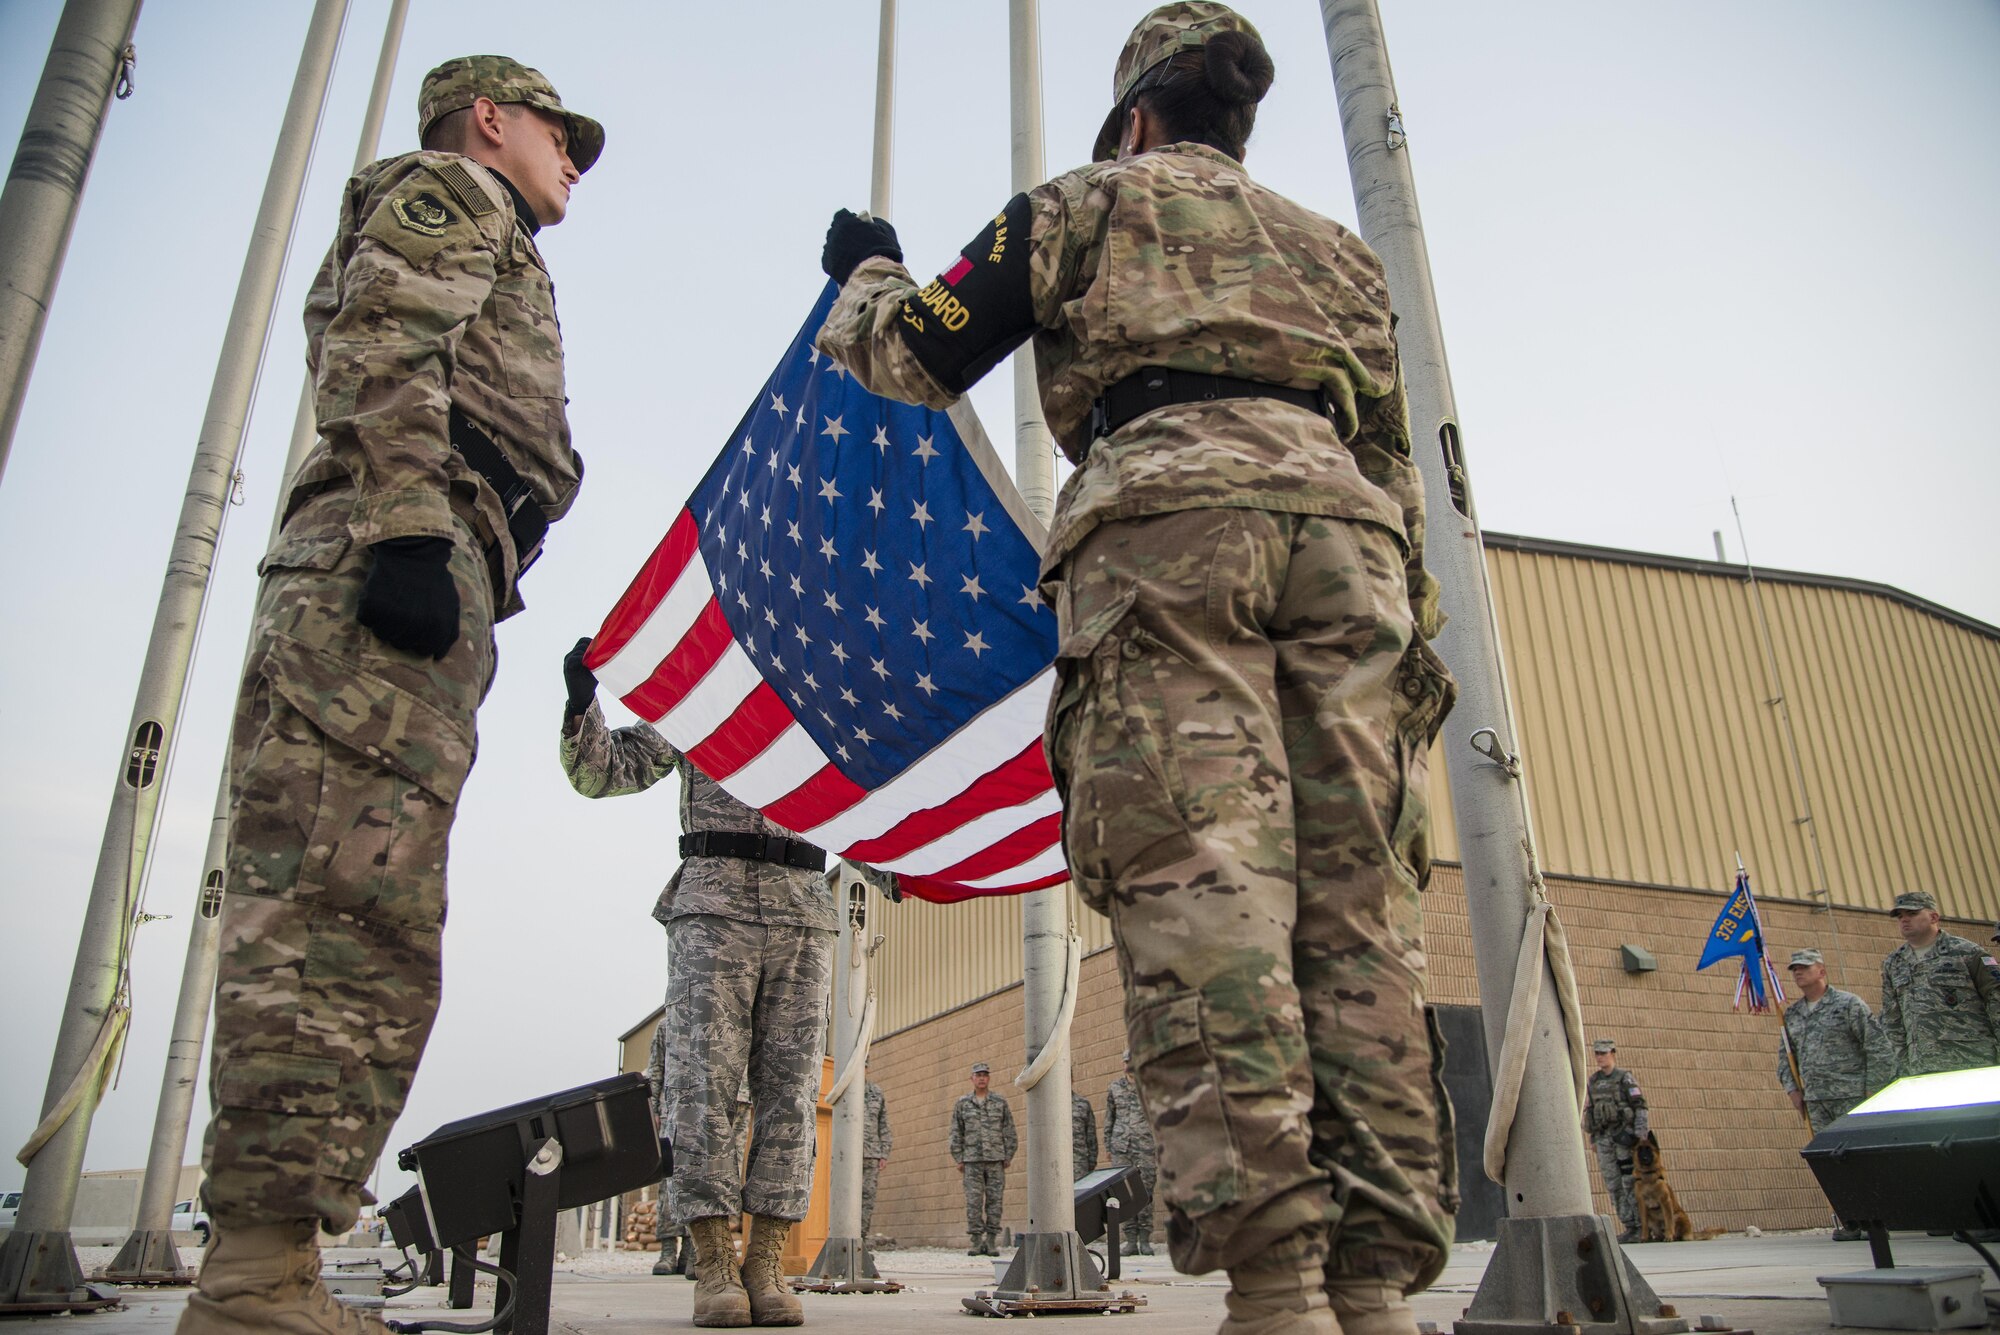 U.S. Air Force Airmen begin to fold an American flag during a
retreat ceremony recognizing the fourteenth anniversary of Sept. 11, 2001, at Al Udeid Air Base, Qatar, Sept. 11, 2015. The retreat ceremony signals the end of the official duty day and serves as a ceremony for paying respect to the flag. In this ceremony, respect was paid to the flag and the memory
of those lost on Sept. 11, 2001. (U.S. Air Force photo/Tech. Sgt. Rasheen Douglas)
